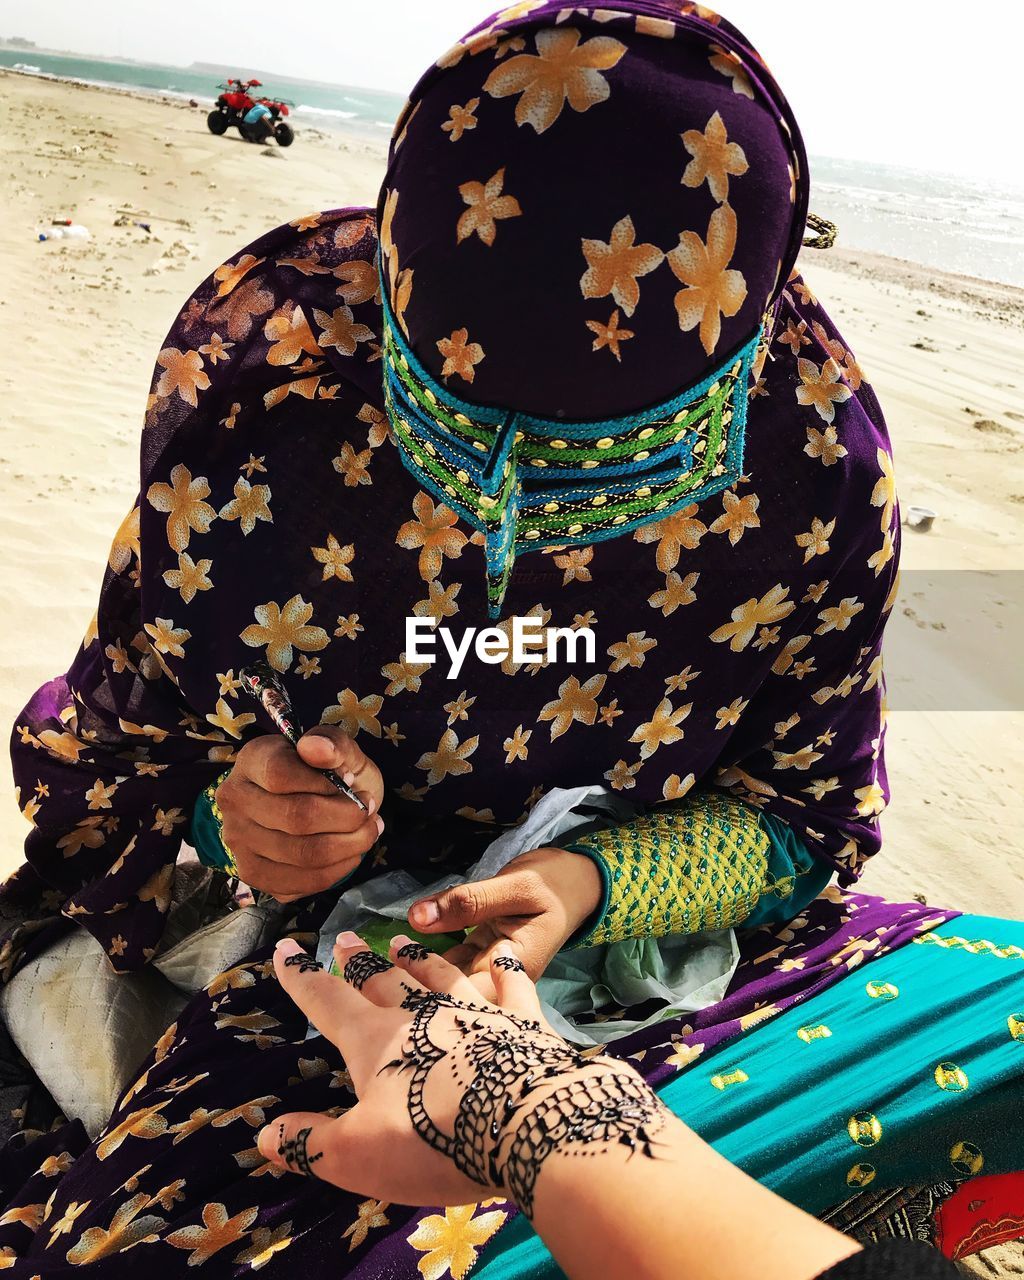 Woman applying henna tattoo on cropped hand at beach